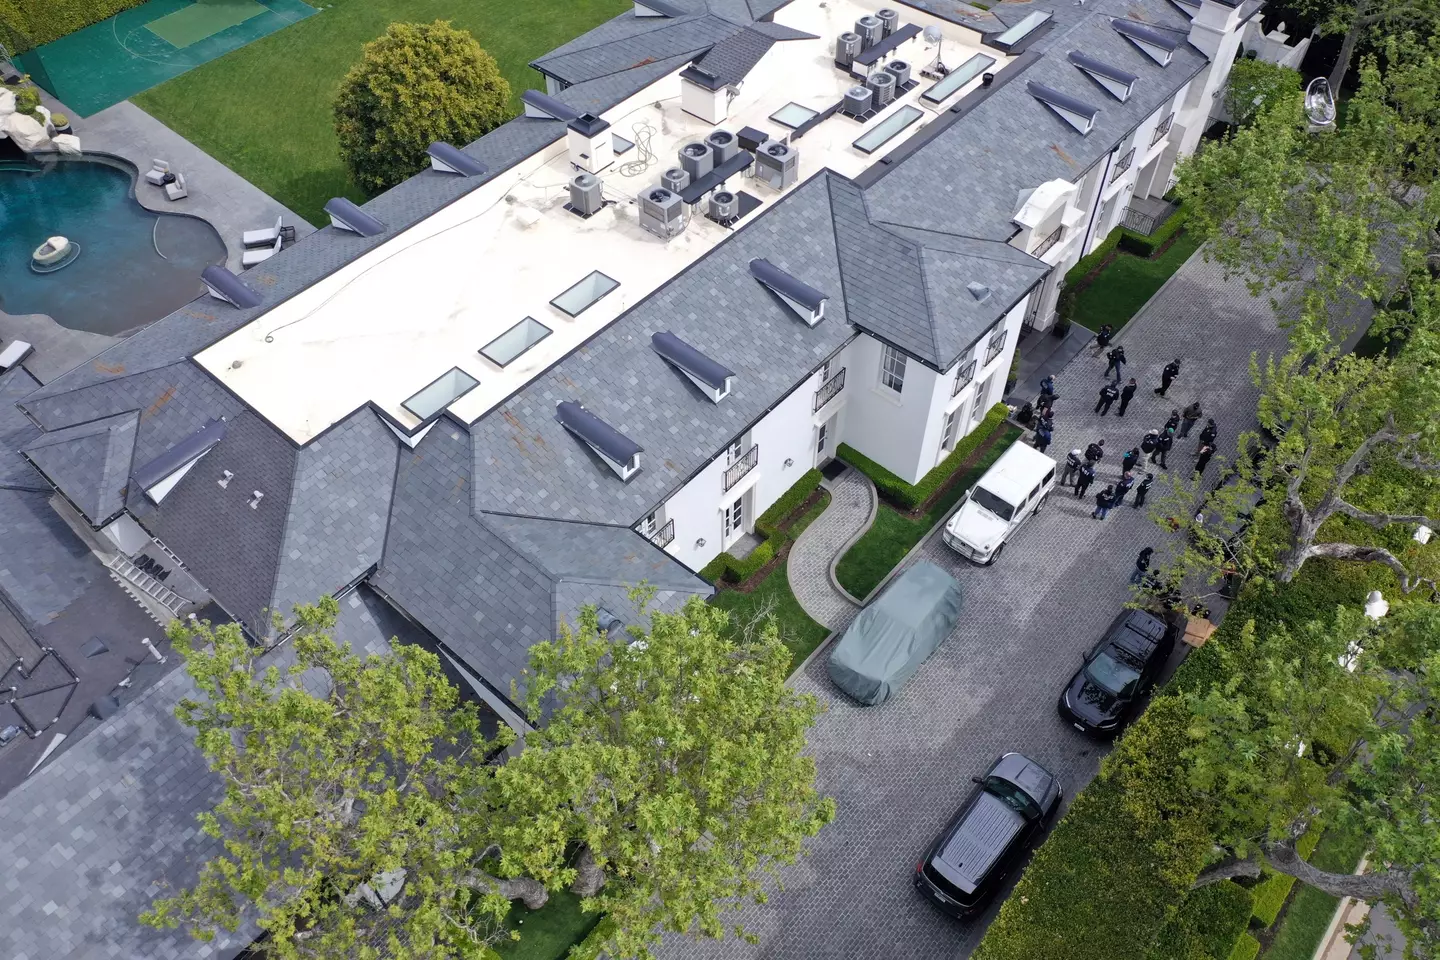 P Diddy's home was raided on March 25.